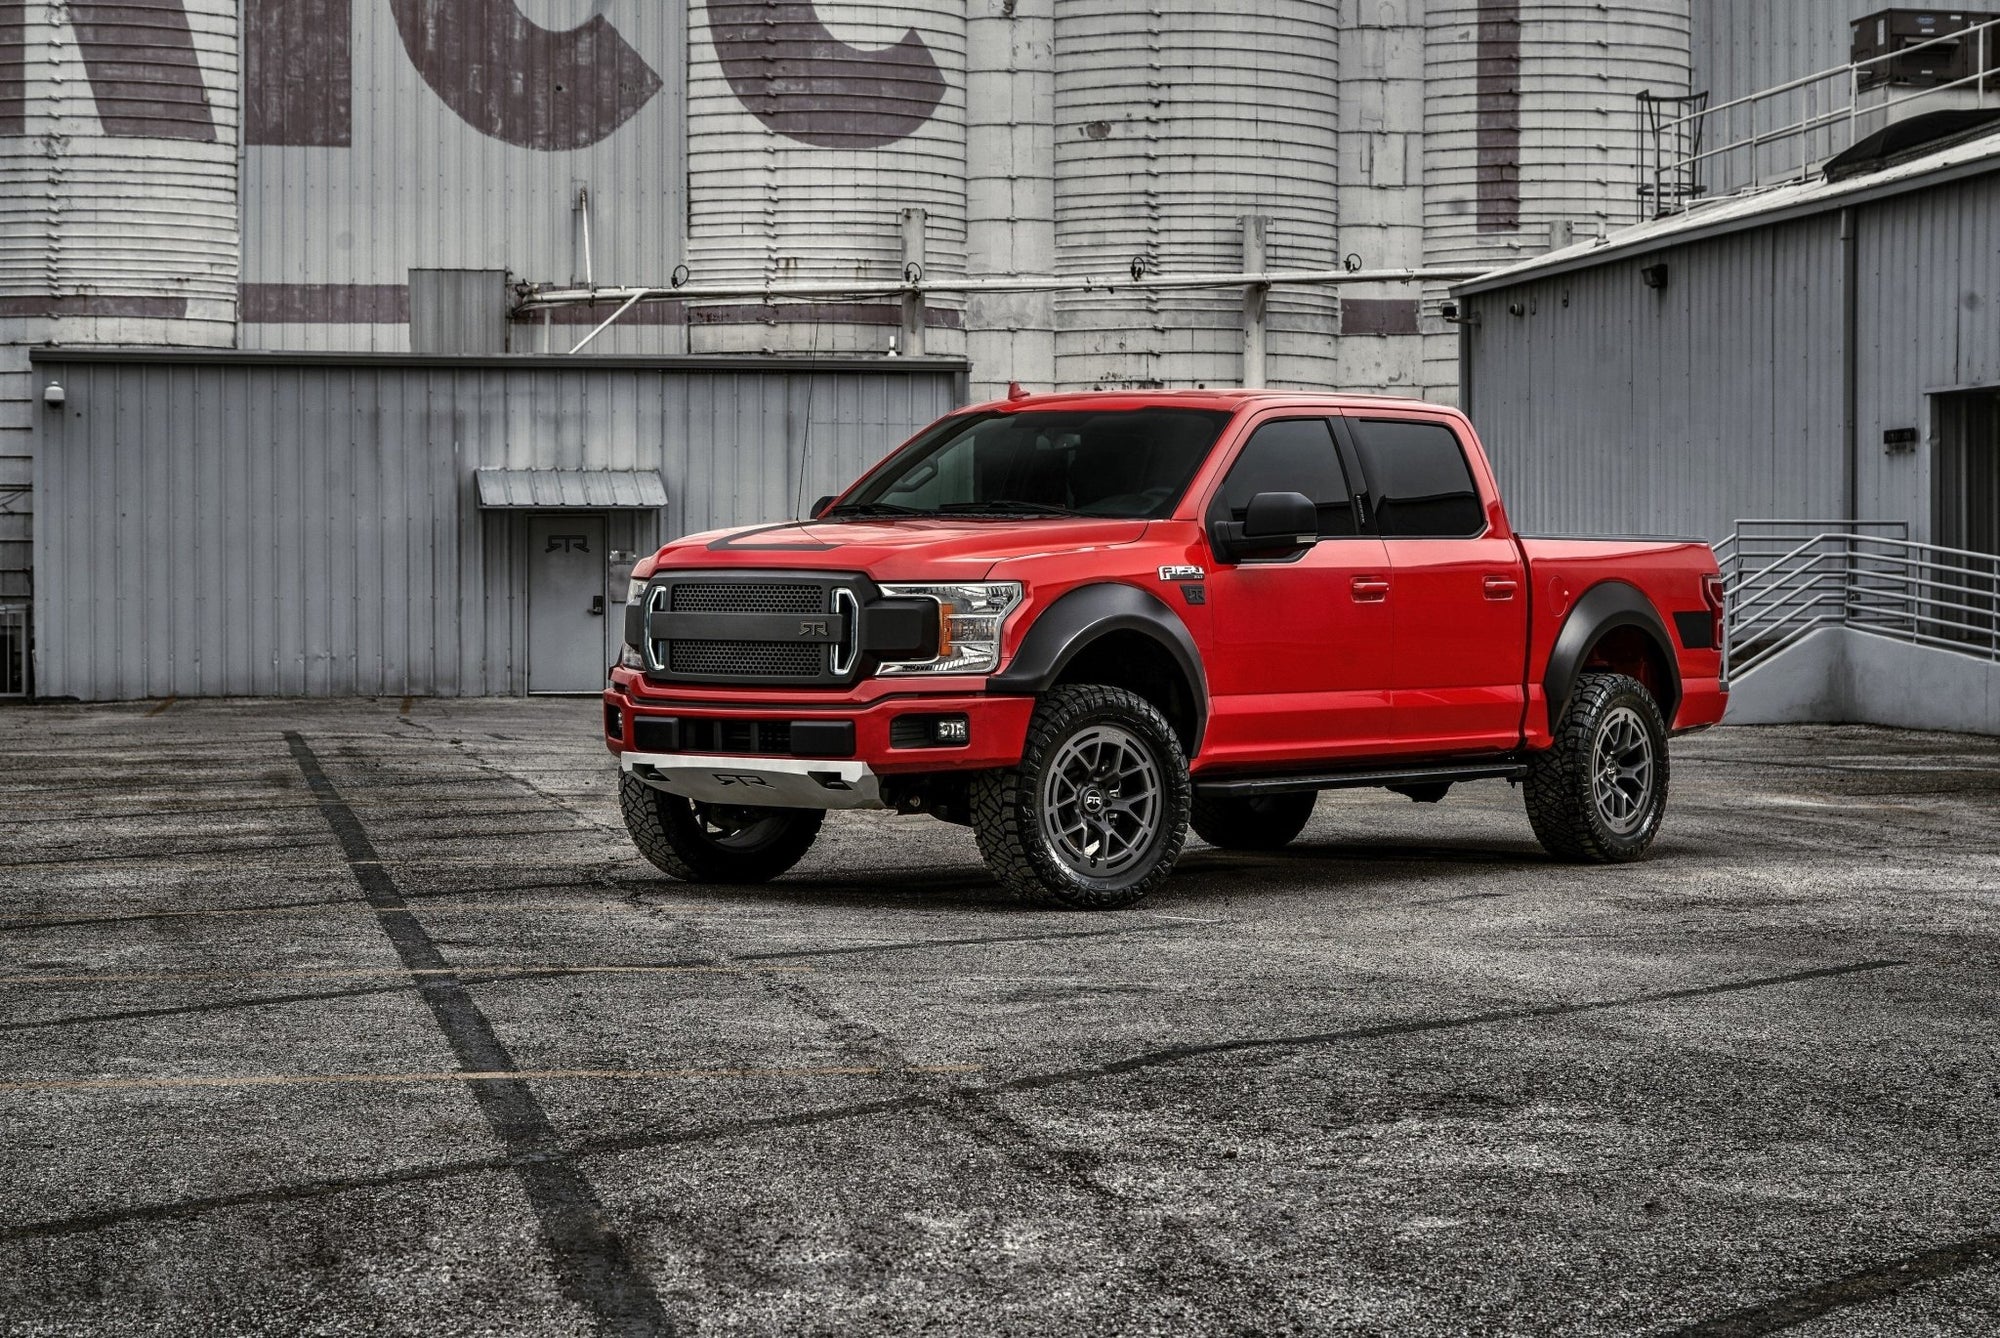 2019 Ford F-150 RTR Pickup Truck Is a Hoon-Ready Machine for Those Who Don't Need a Raptor